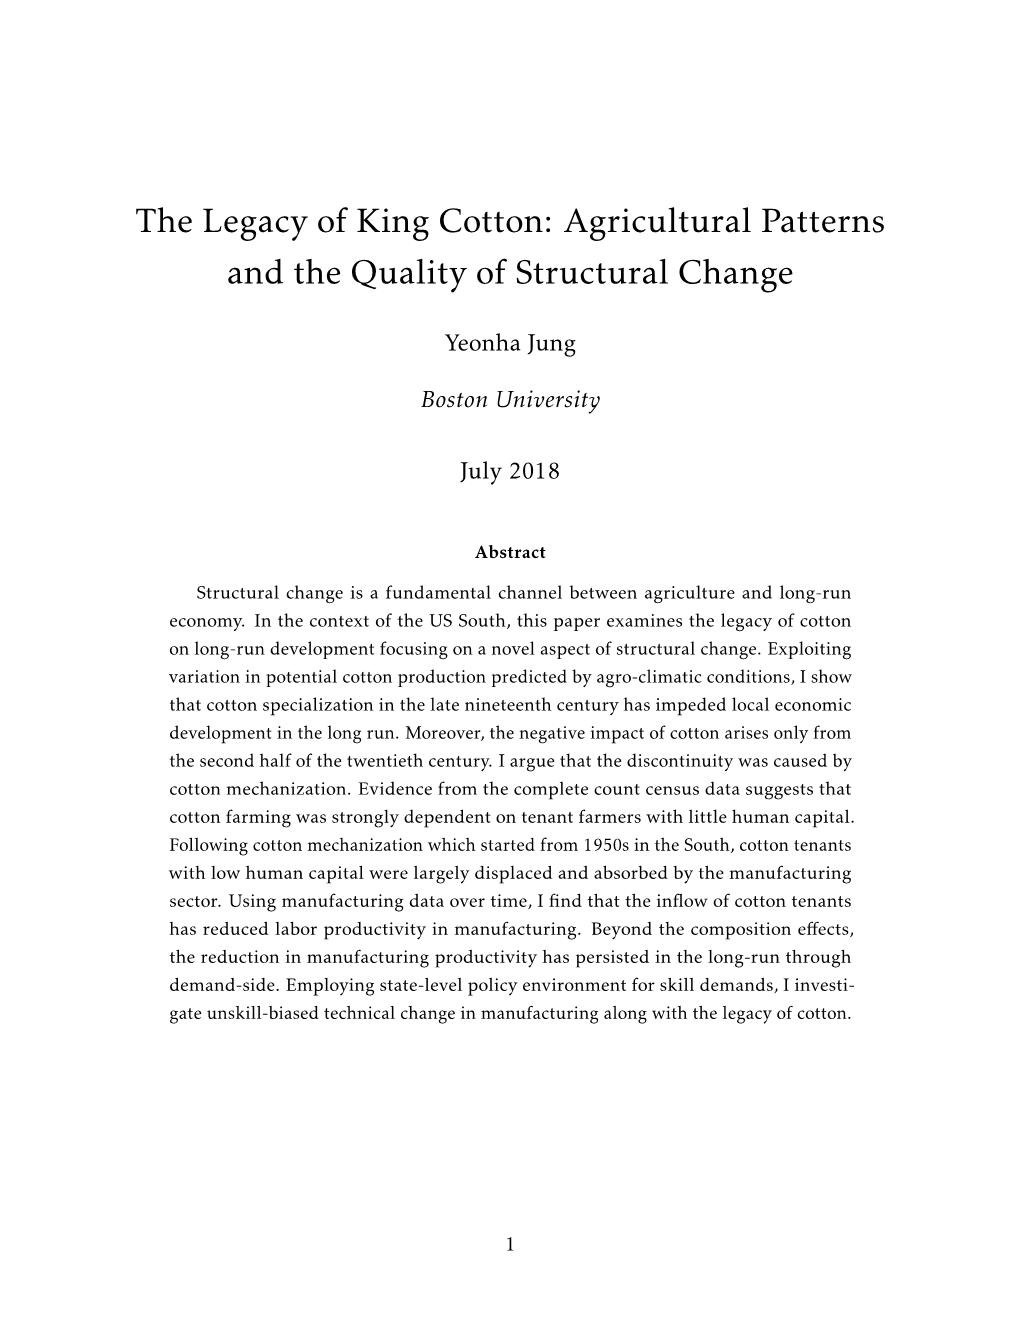 The Legacy of King Cotton: Agricultural Patterns and the Quality of Structural Change